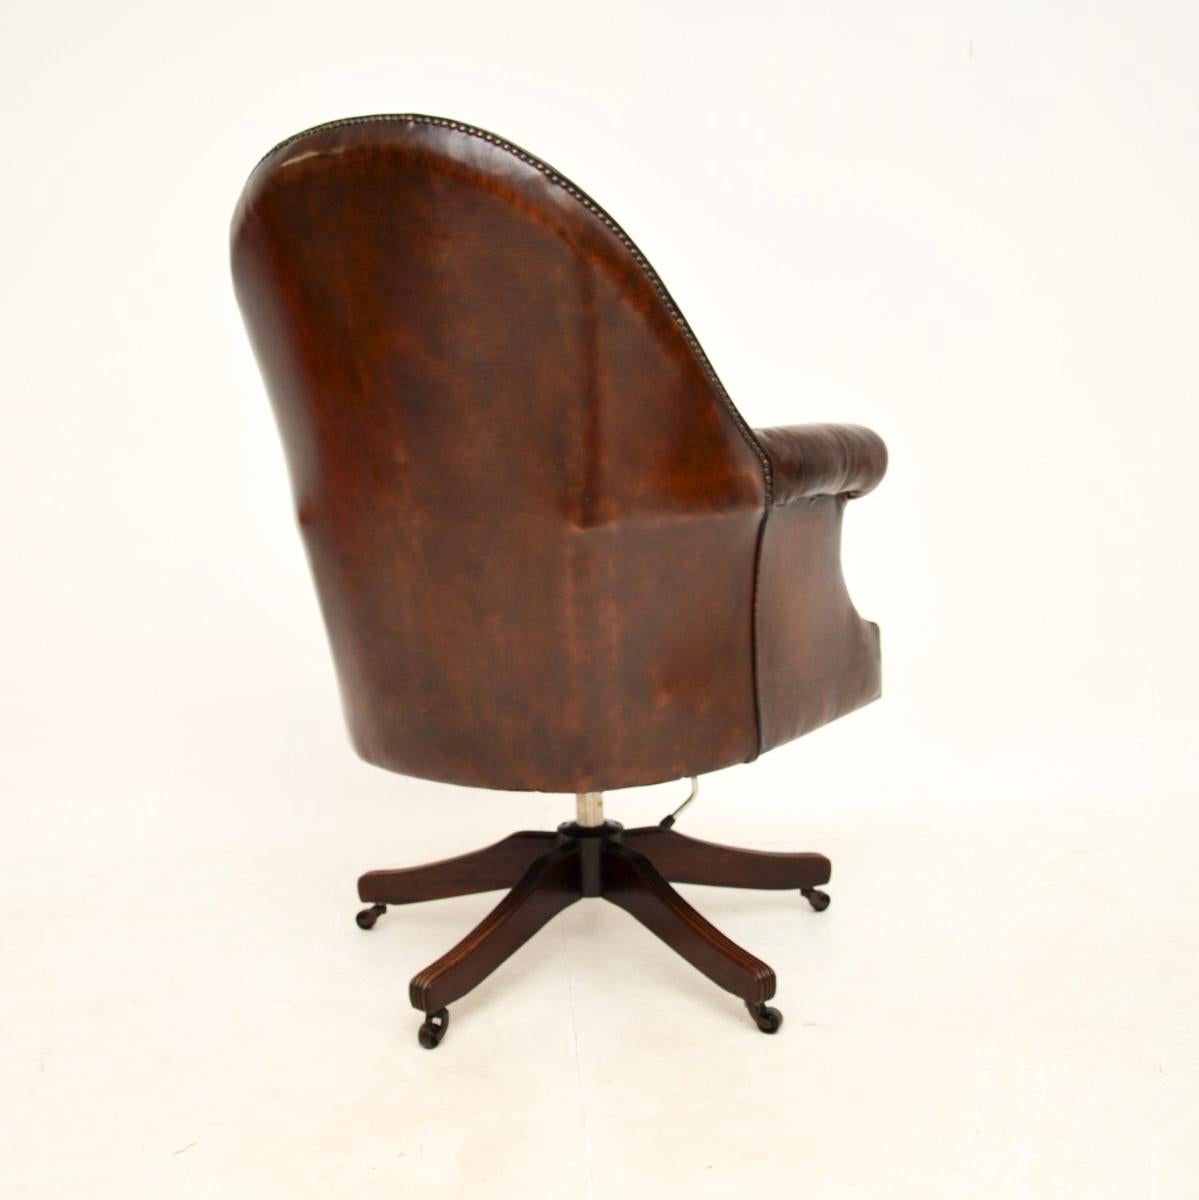 Mid-20th Century Antique Victorian Style Leather Swivel Desk Chair For Sale